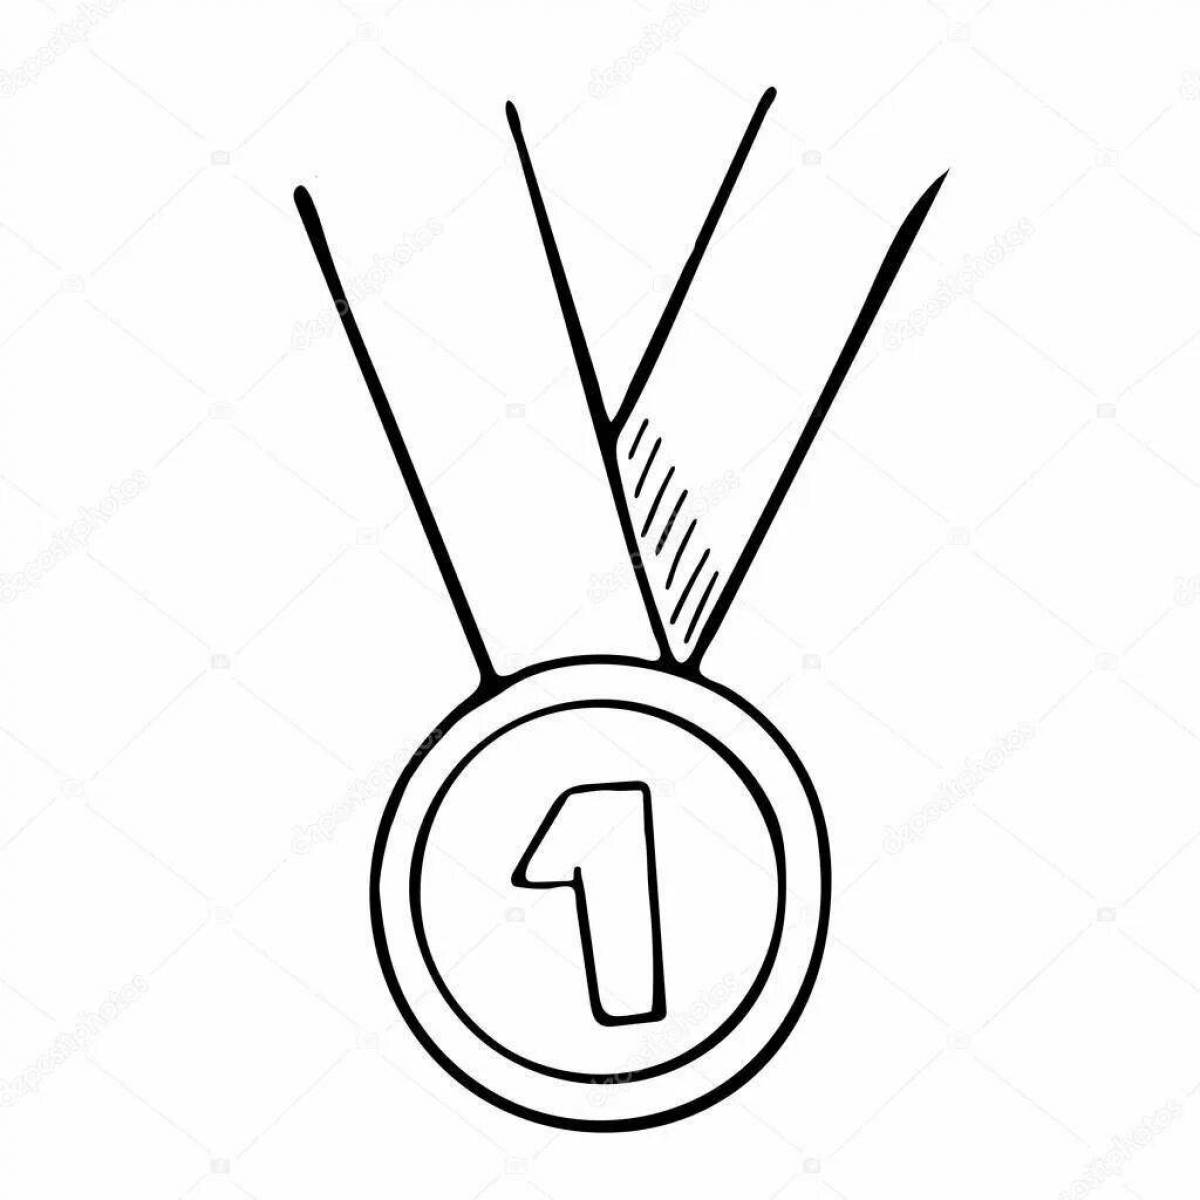 1st place medal colorful coloring page